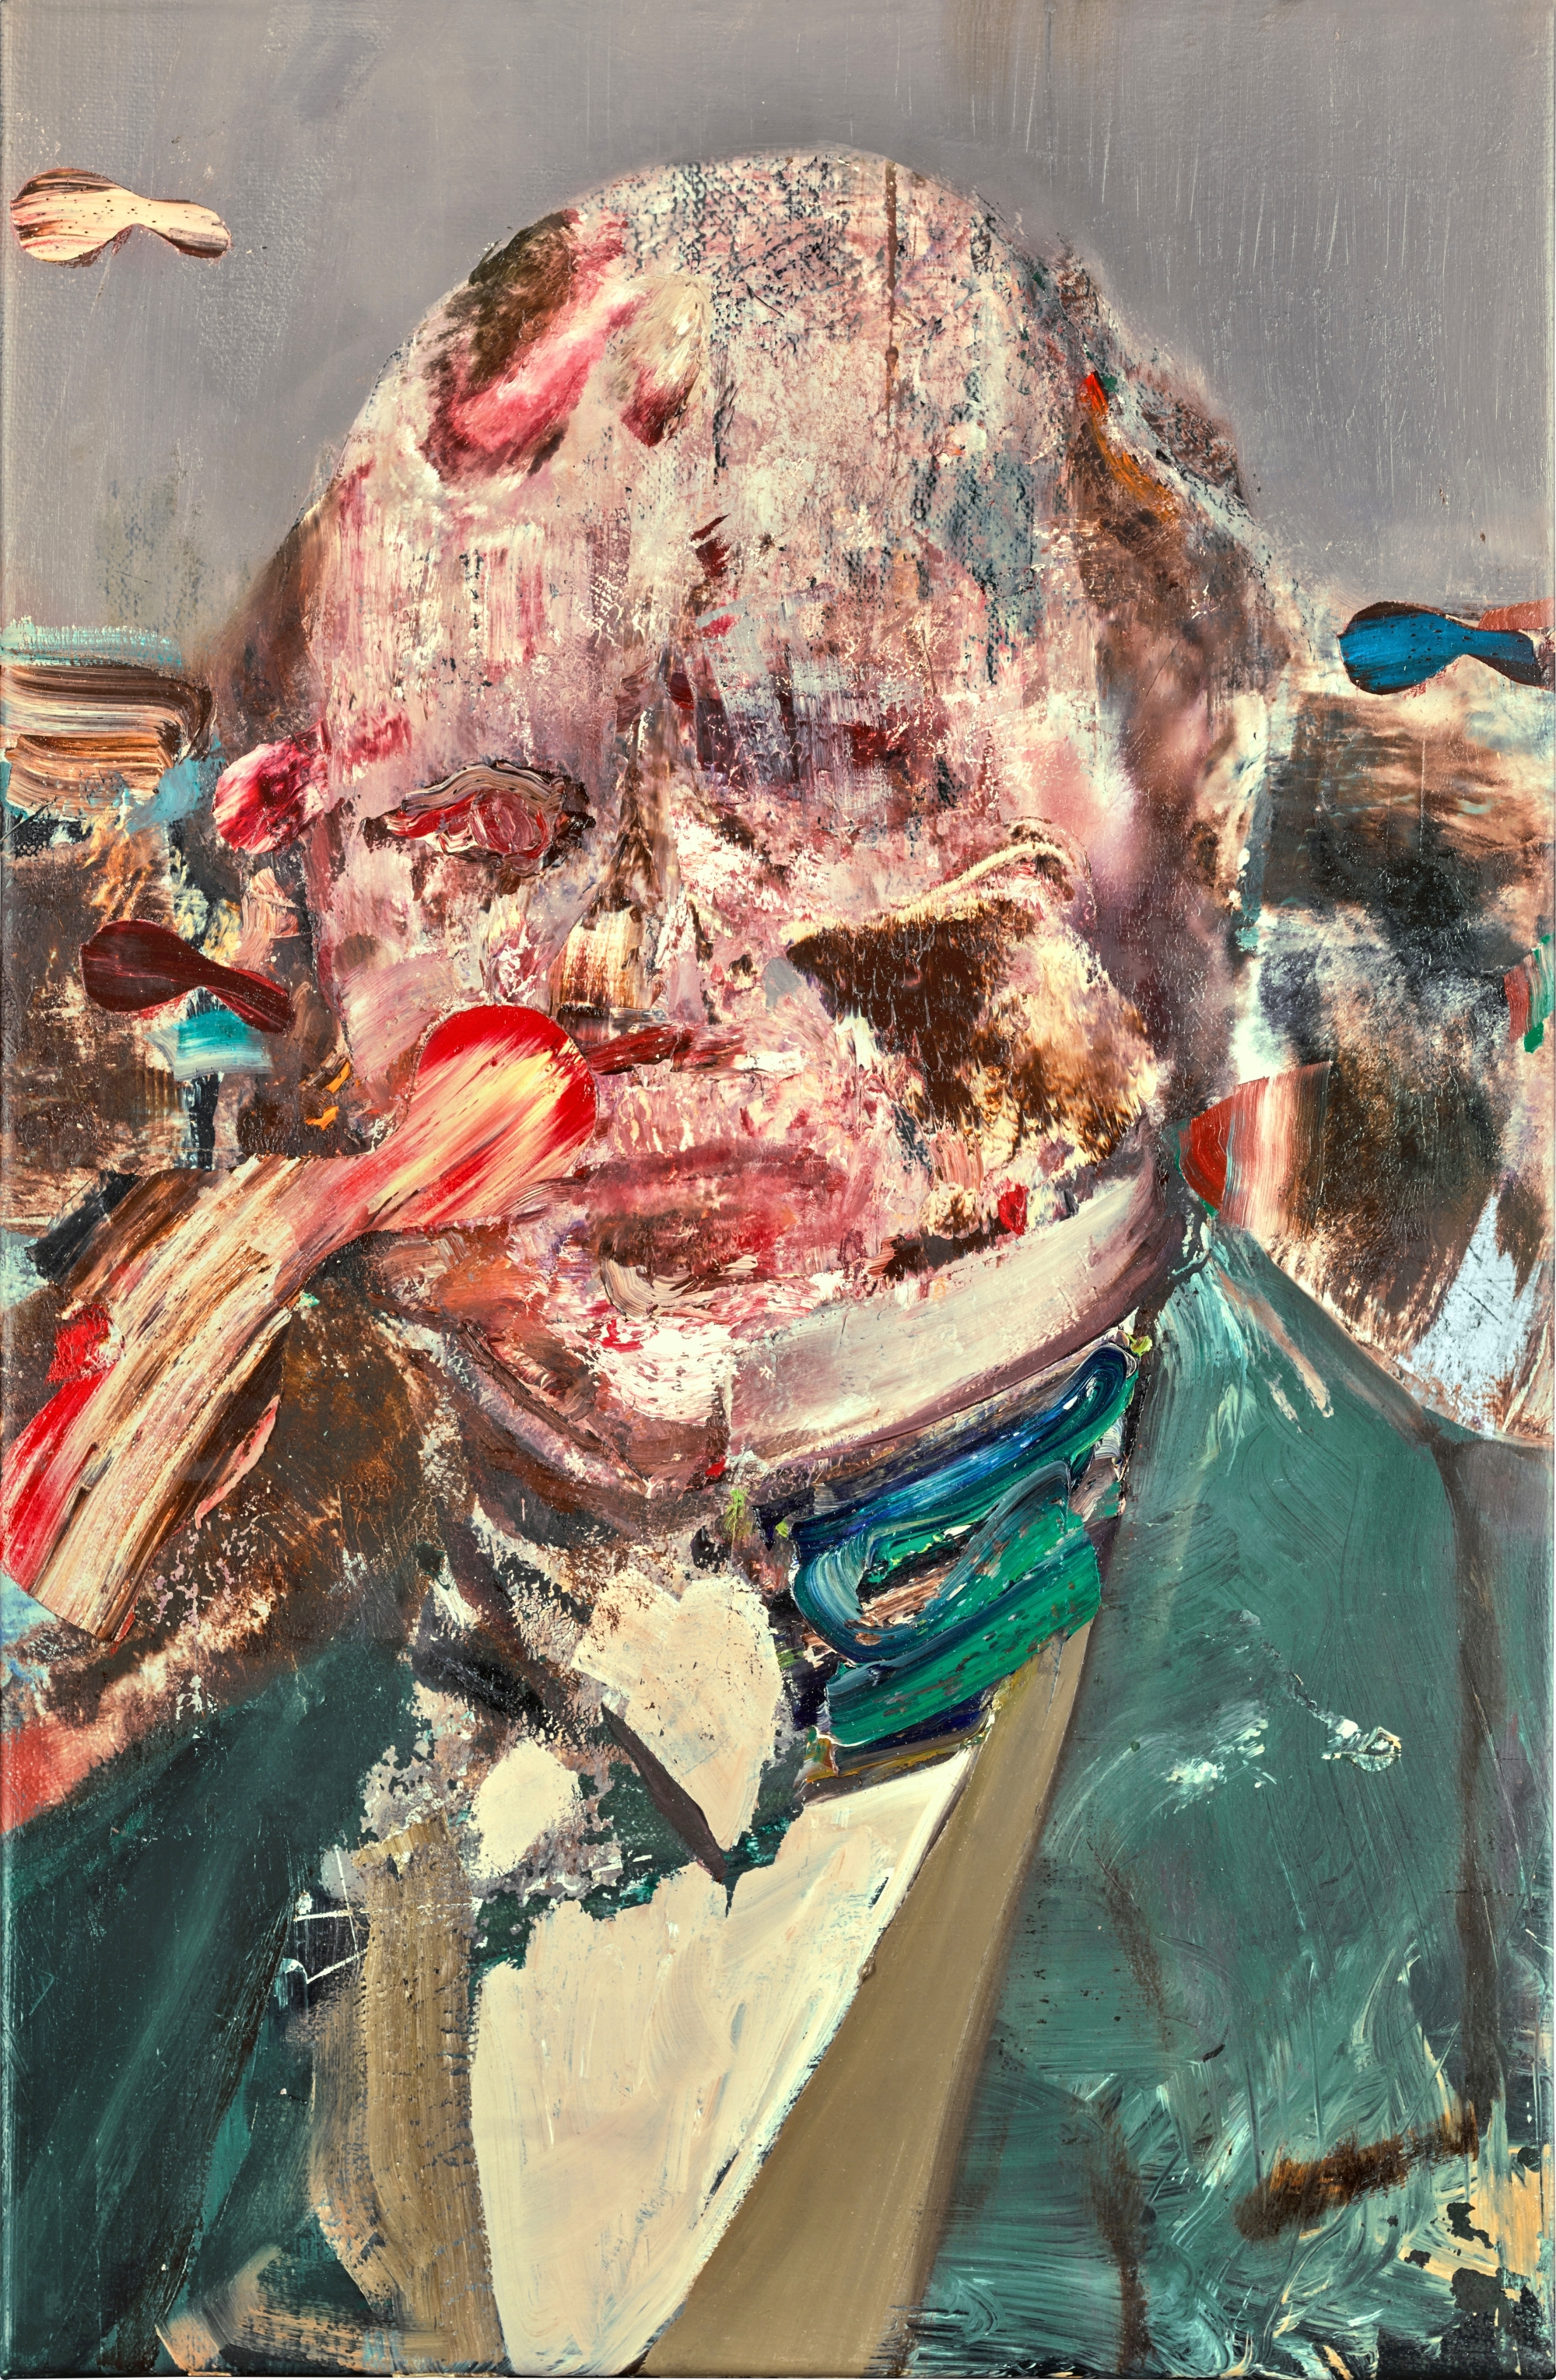 Charles Darwin as a Young Man by Adrian Ghenie, Executed in 2014